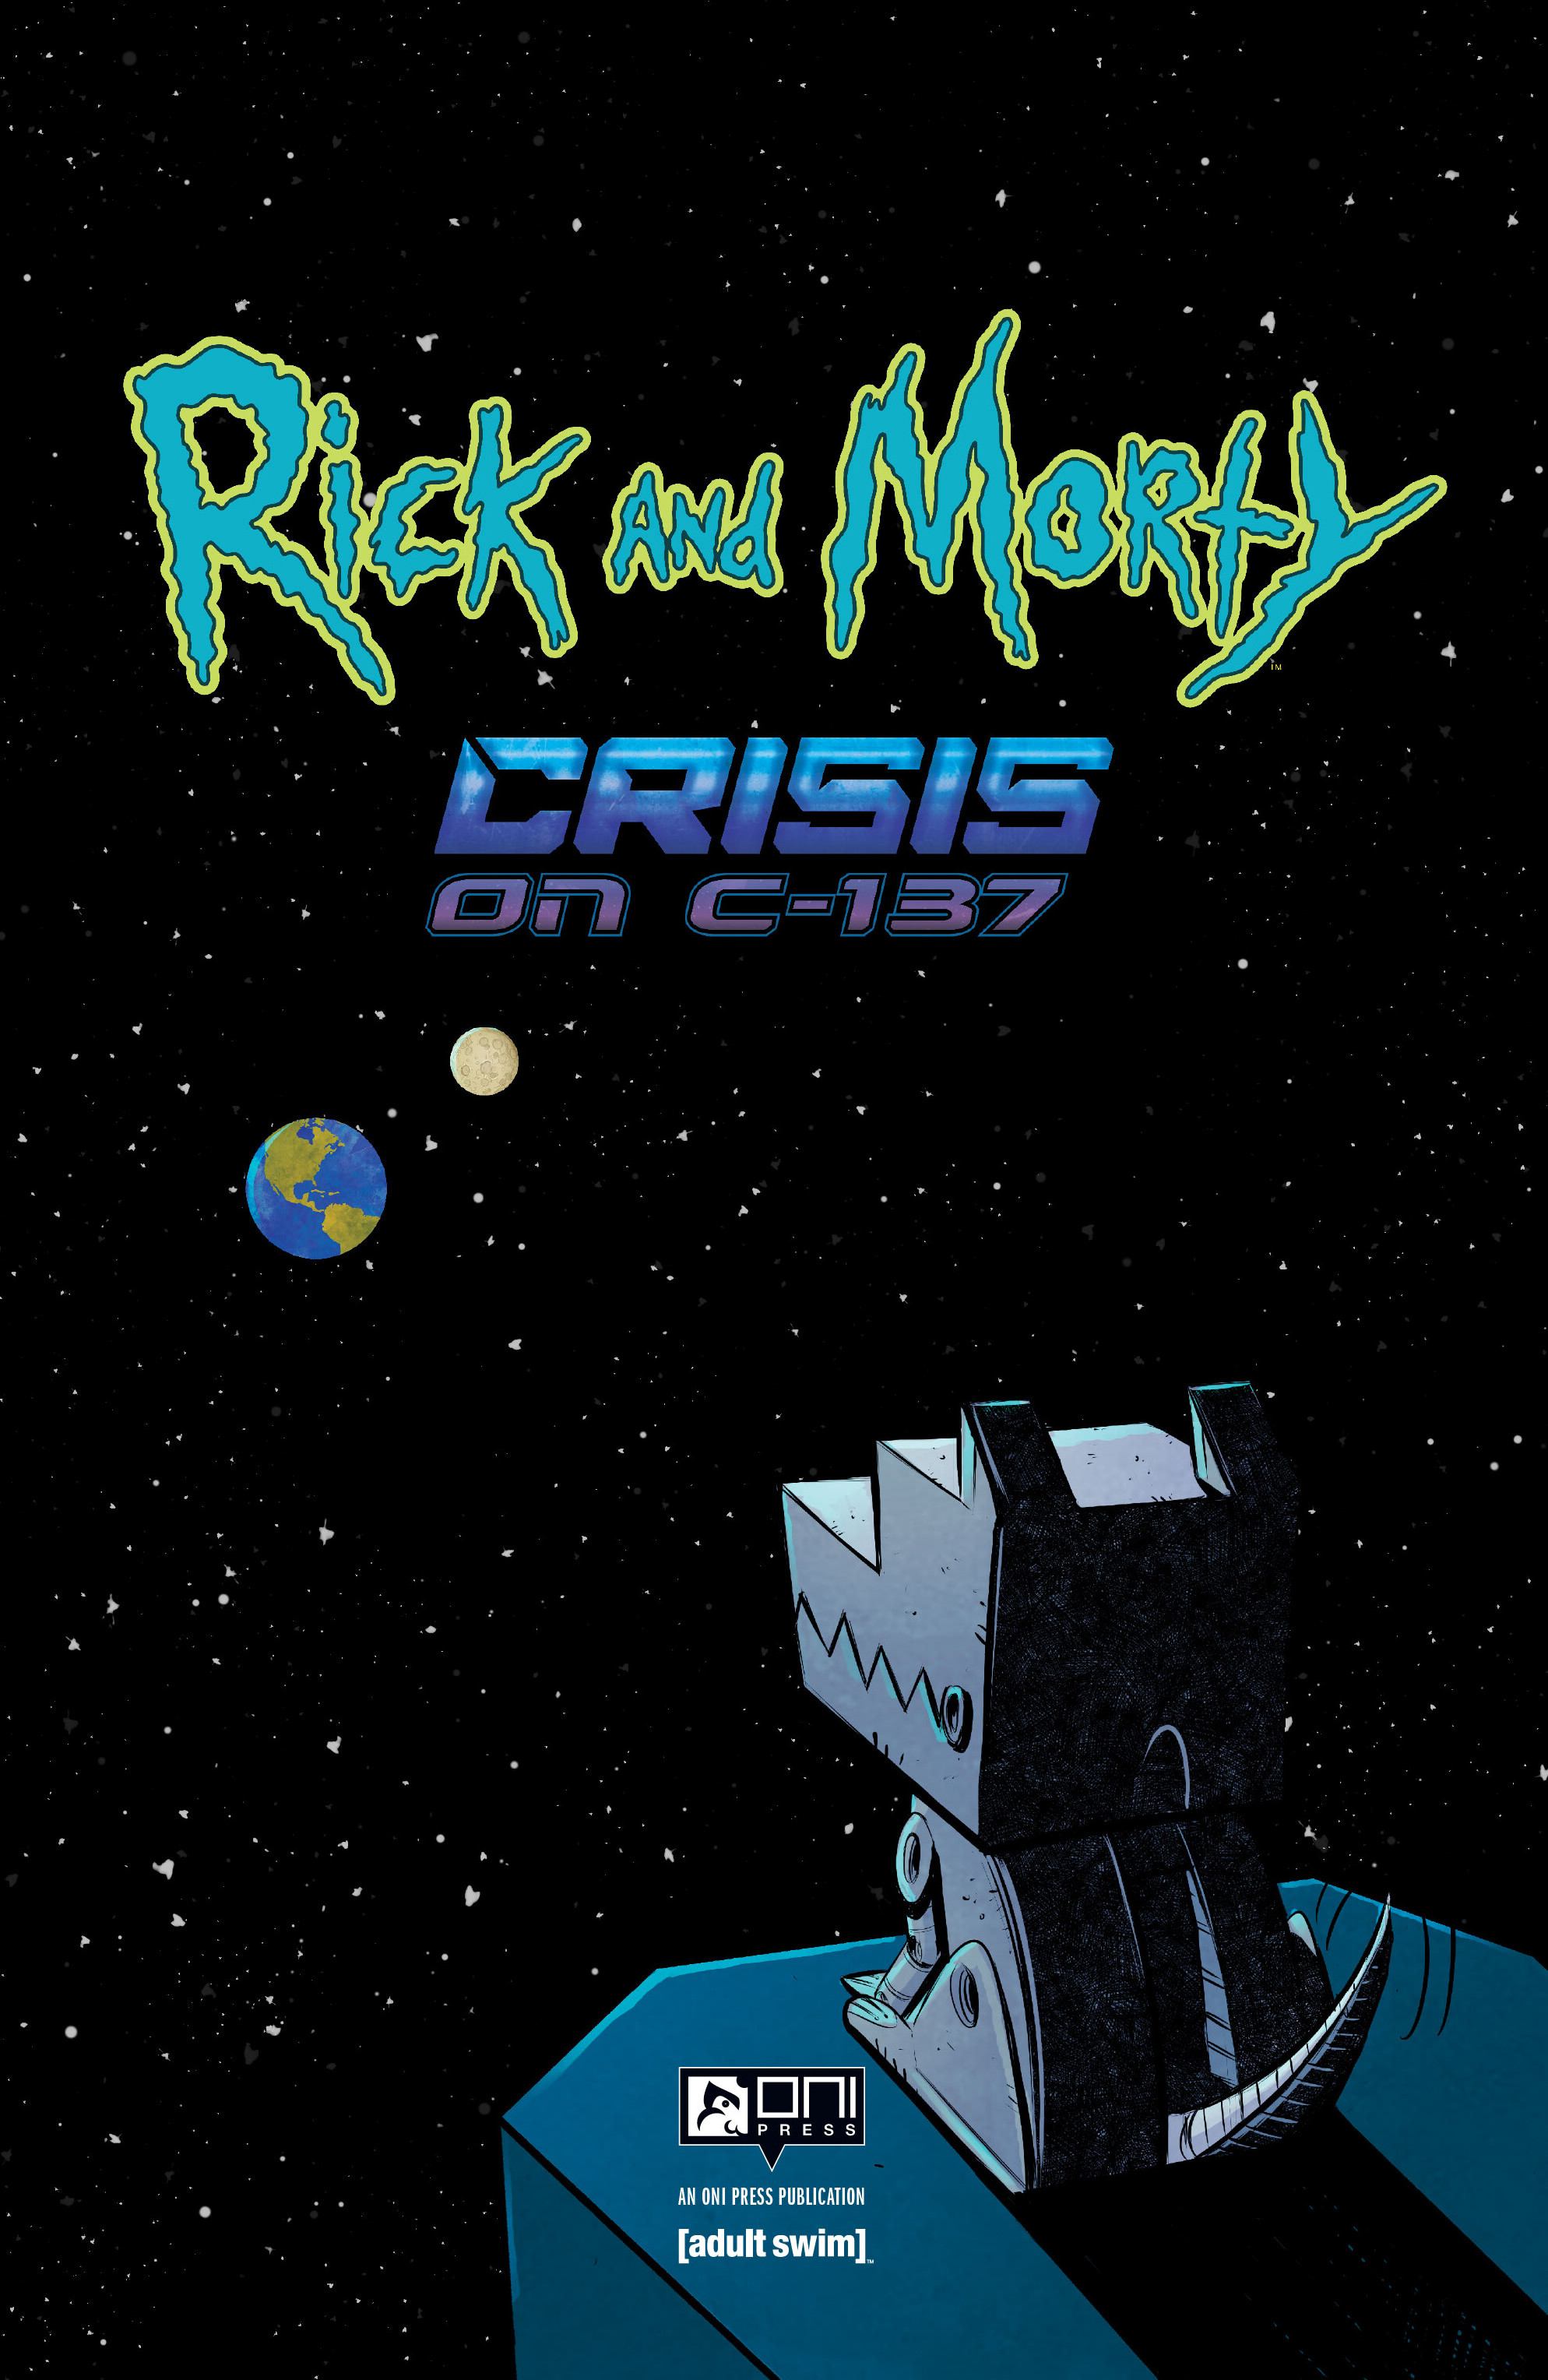 Read online Rick and Morty: Crisis on C-137 comic -  Issue # TPB - 2